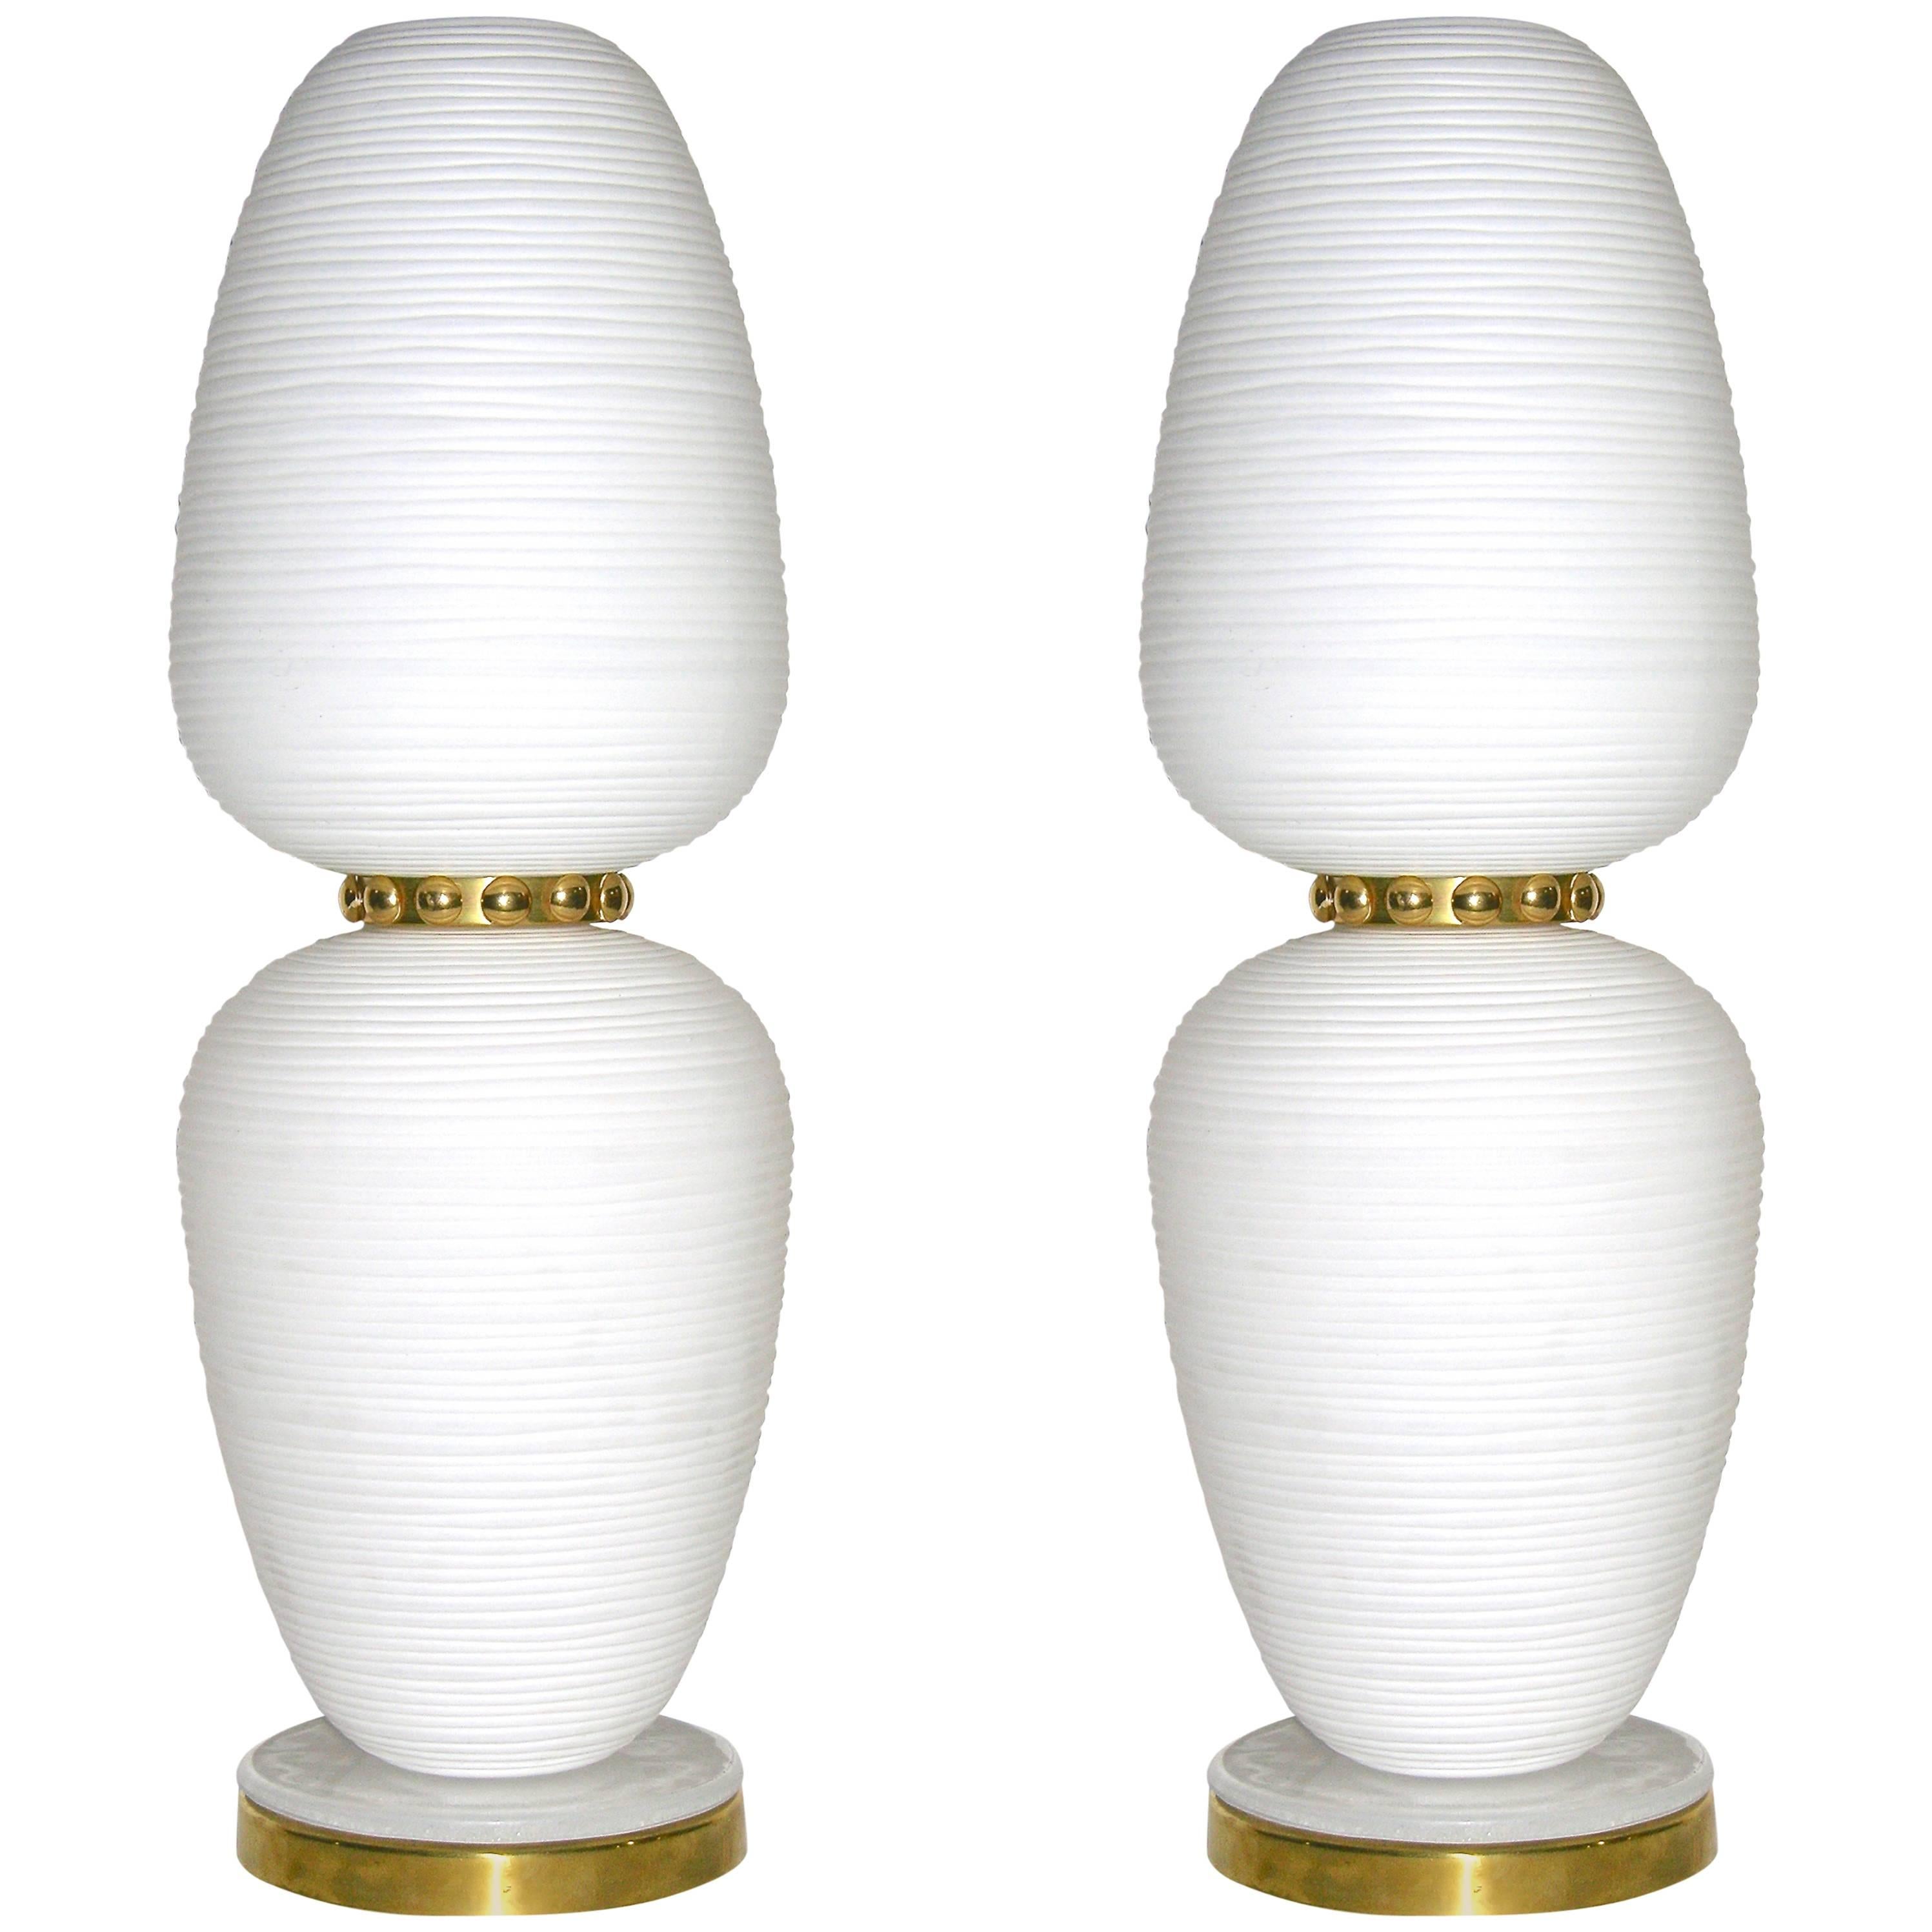 1970s Vistosi Italian Pair of Vintage Gold and White Murano Glass Lamps